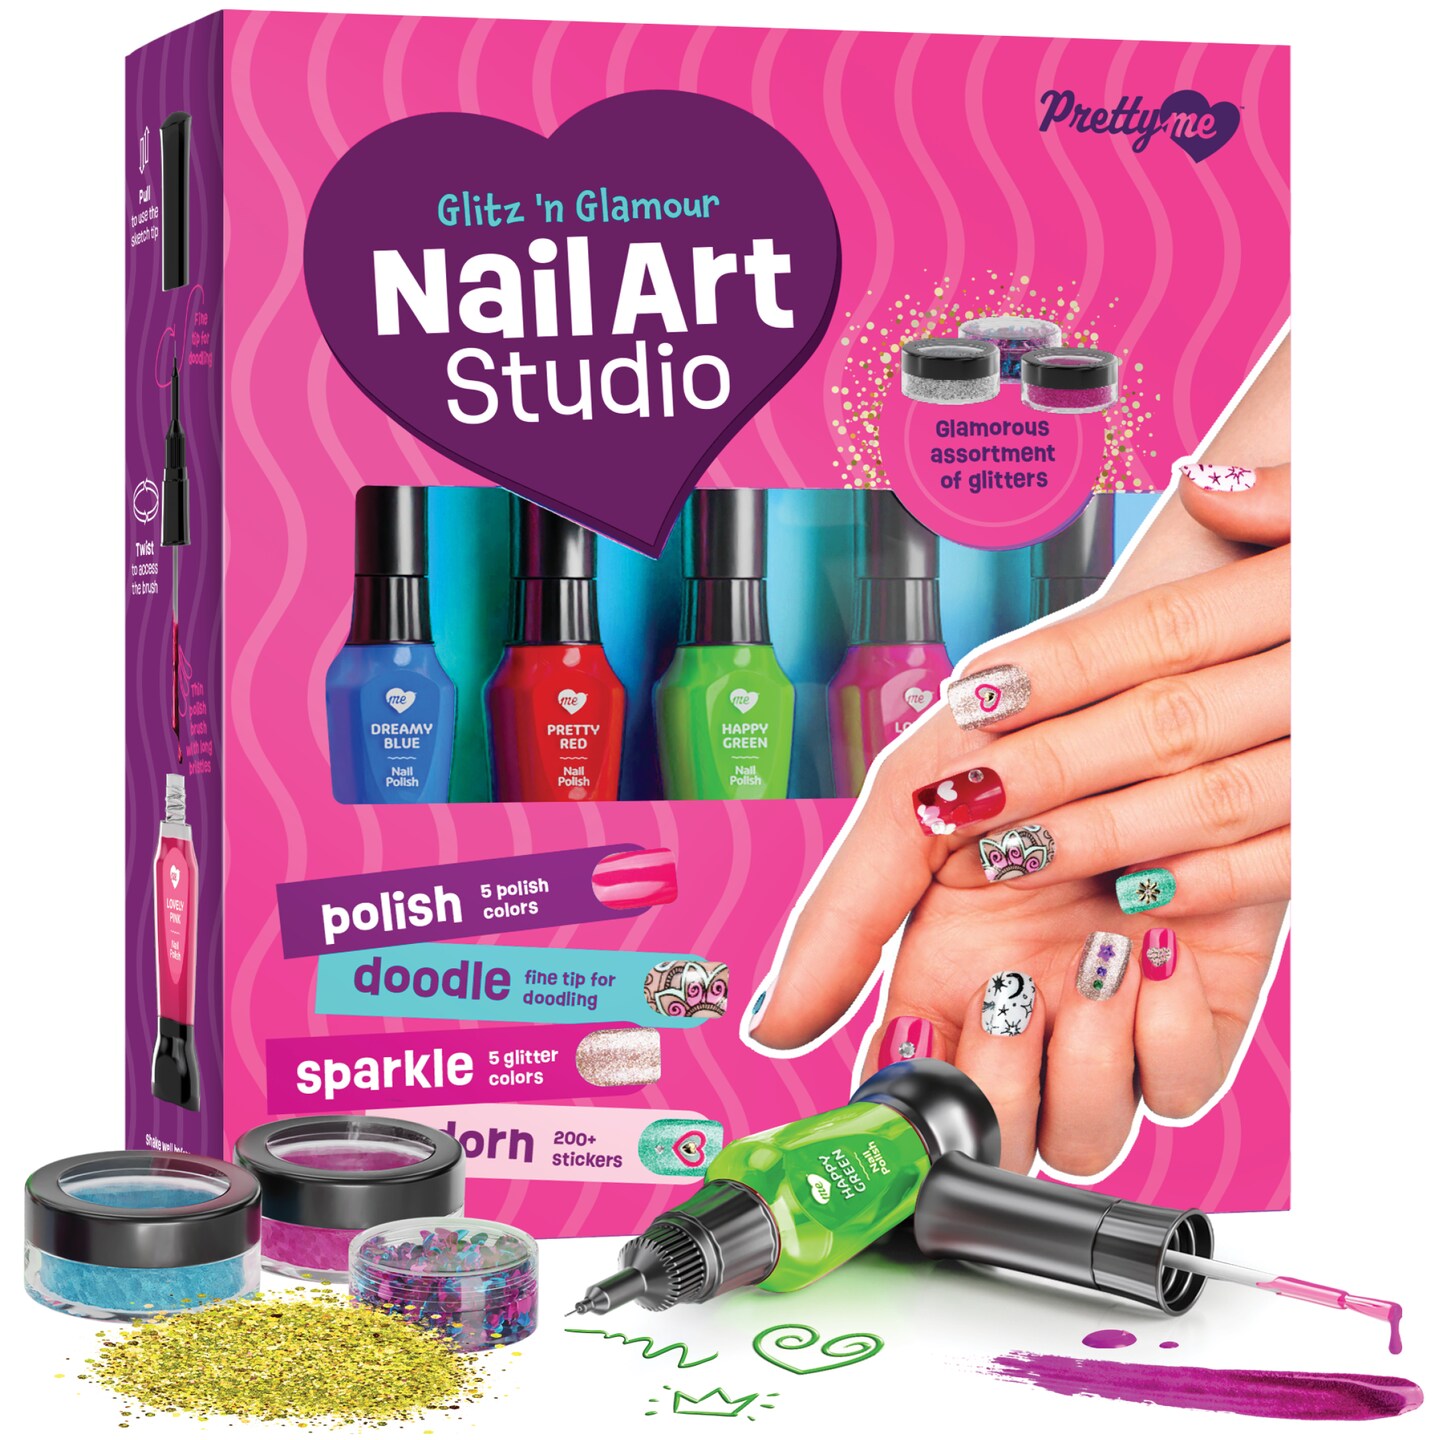 Nail Art Studio for Girls - Nail Polish Kit for Kids Ages 7-12 Years Old - Girl Gifts Ideas - Girls Nails Gift Set - Cool Girly Stuff - Polish, Pens, Glitter, Stickers, Gems, Filer